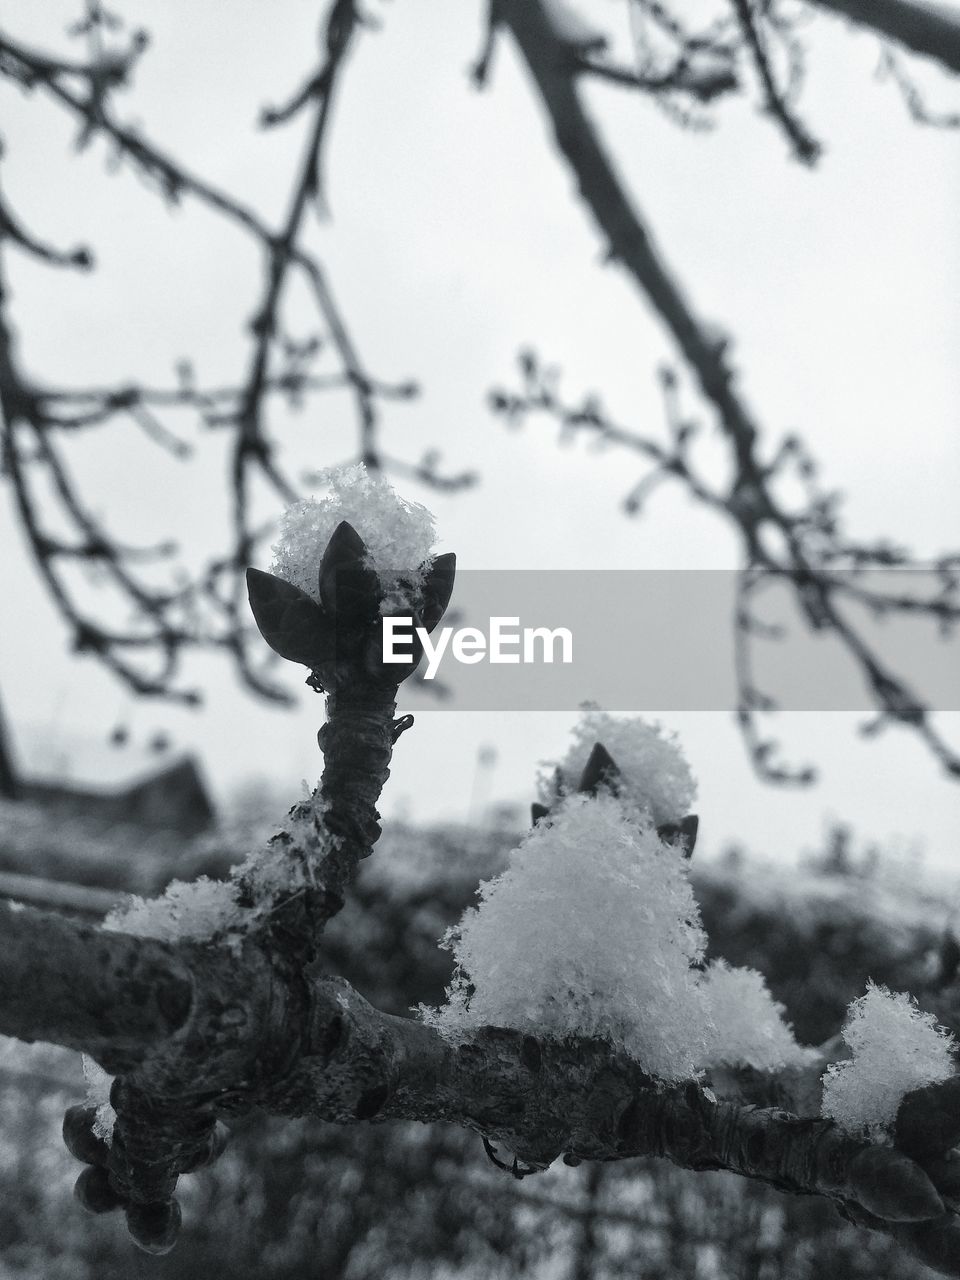 CLOSE-UP OF SNOW ON BRANCH